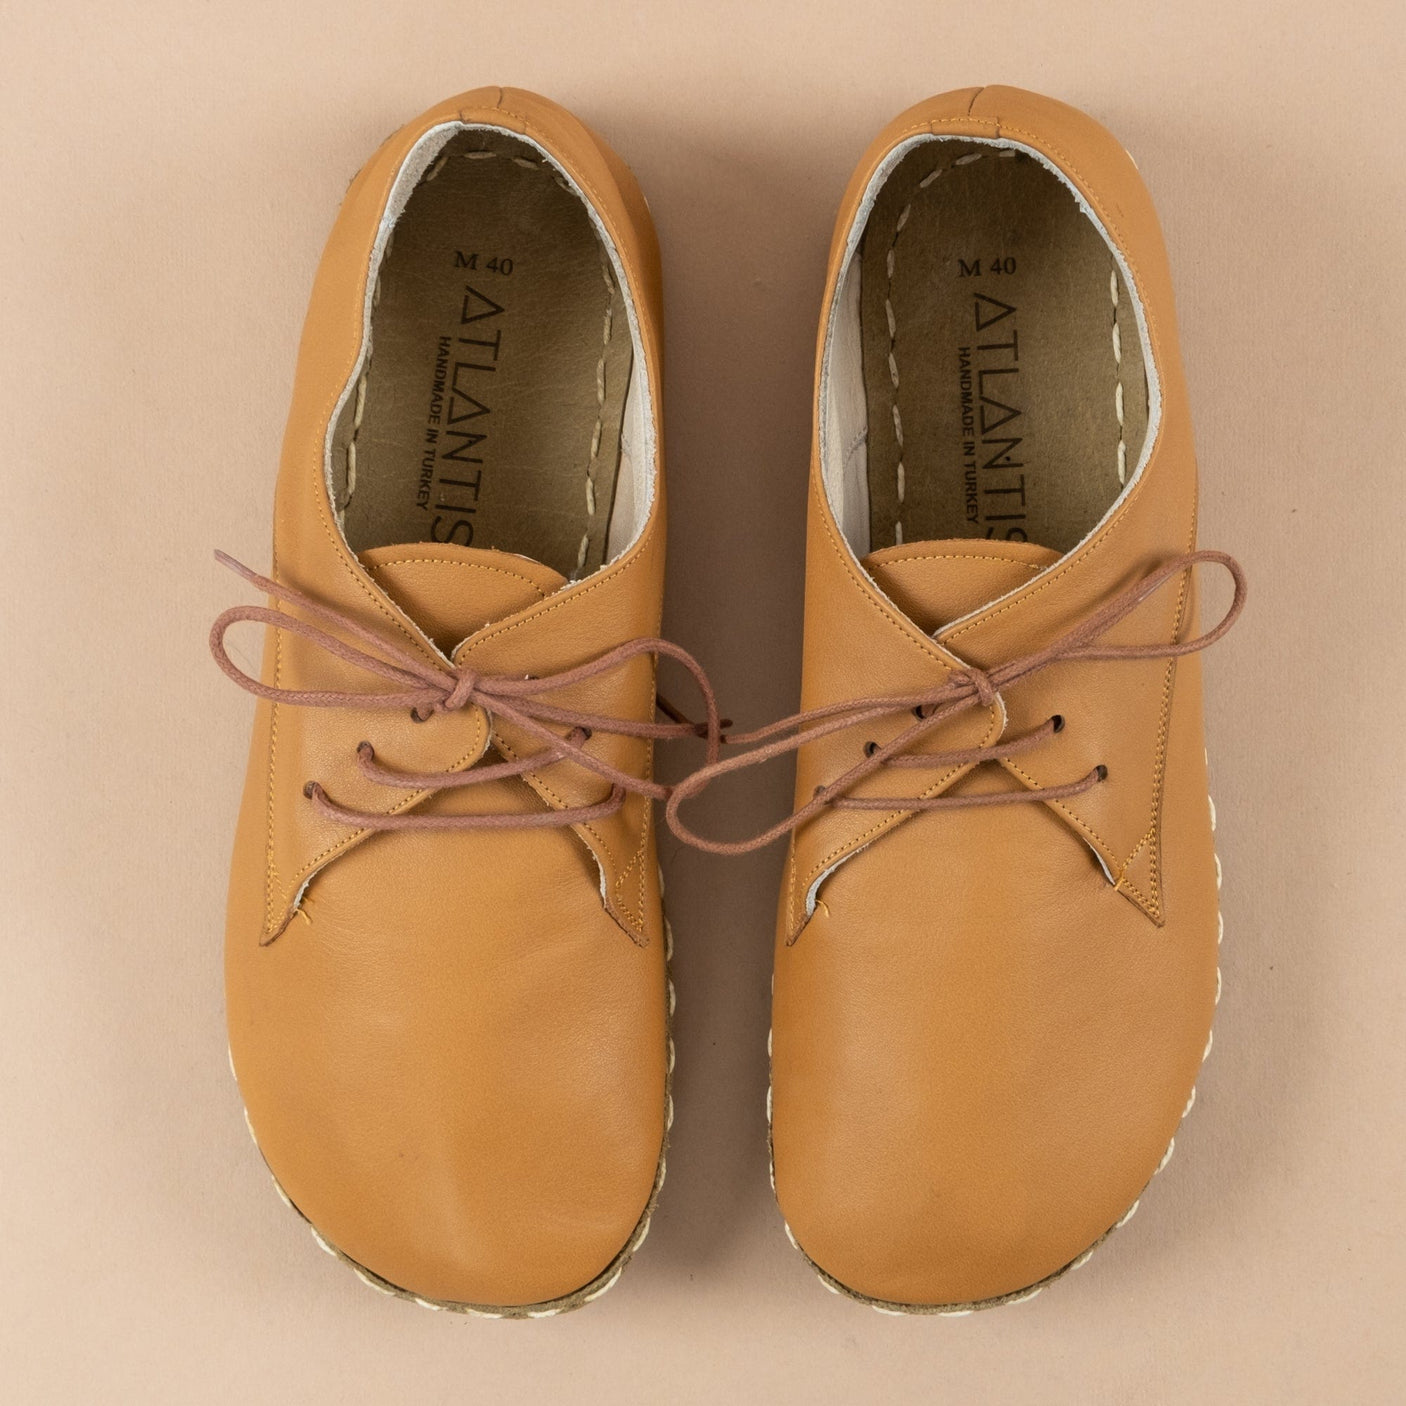 Women's Coconut Leather Oxfords